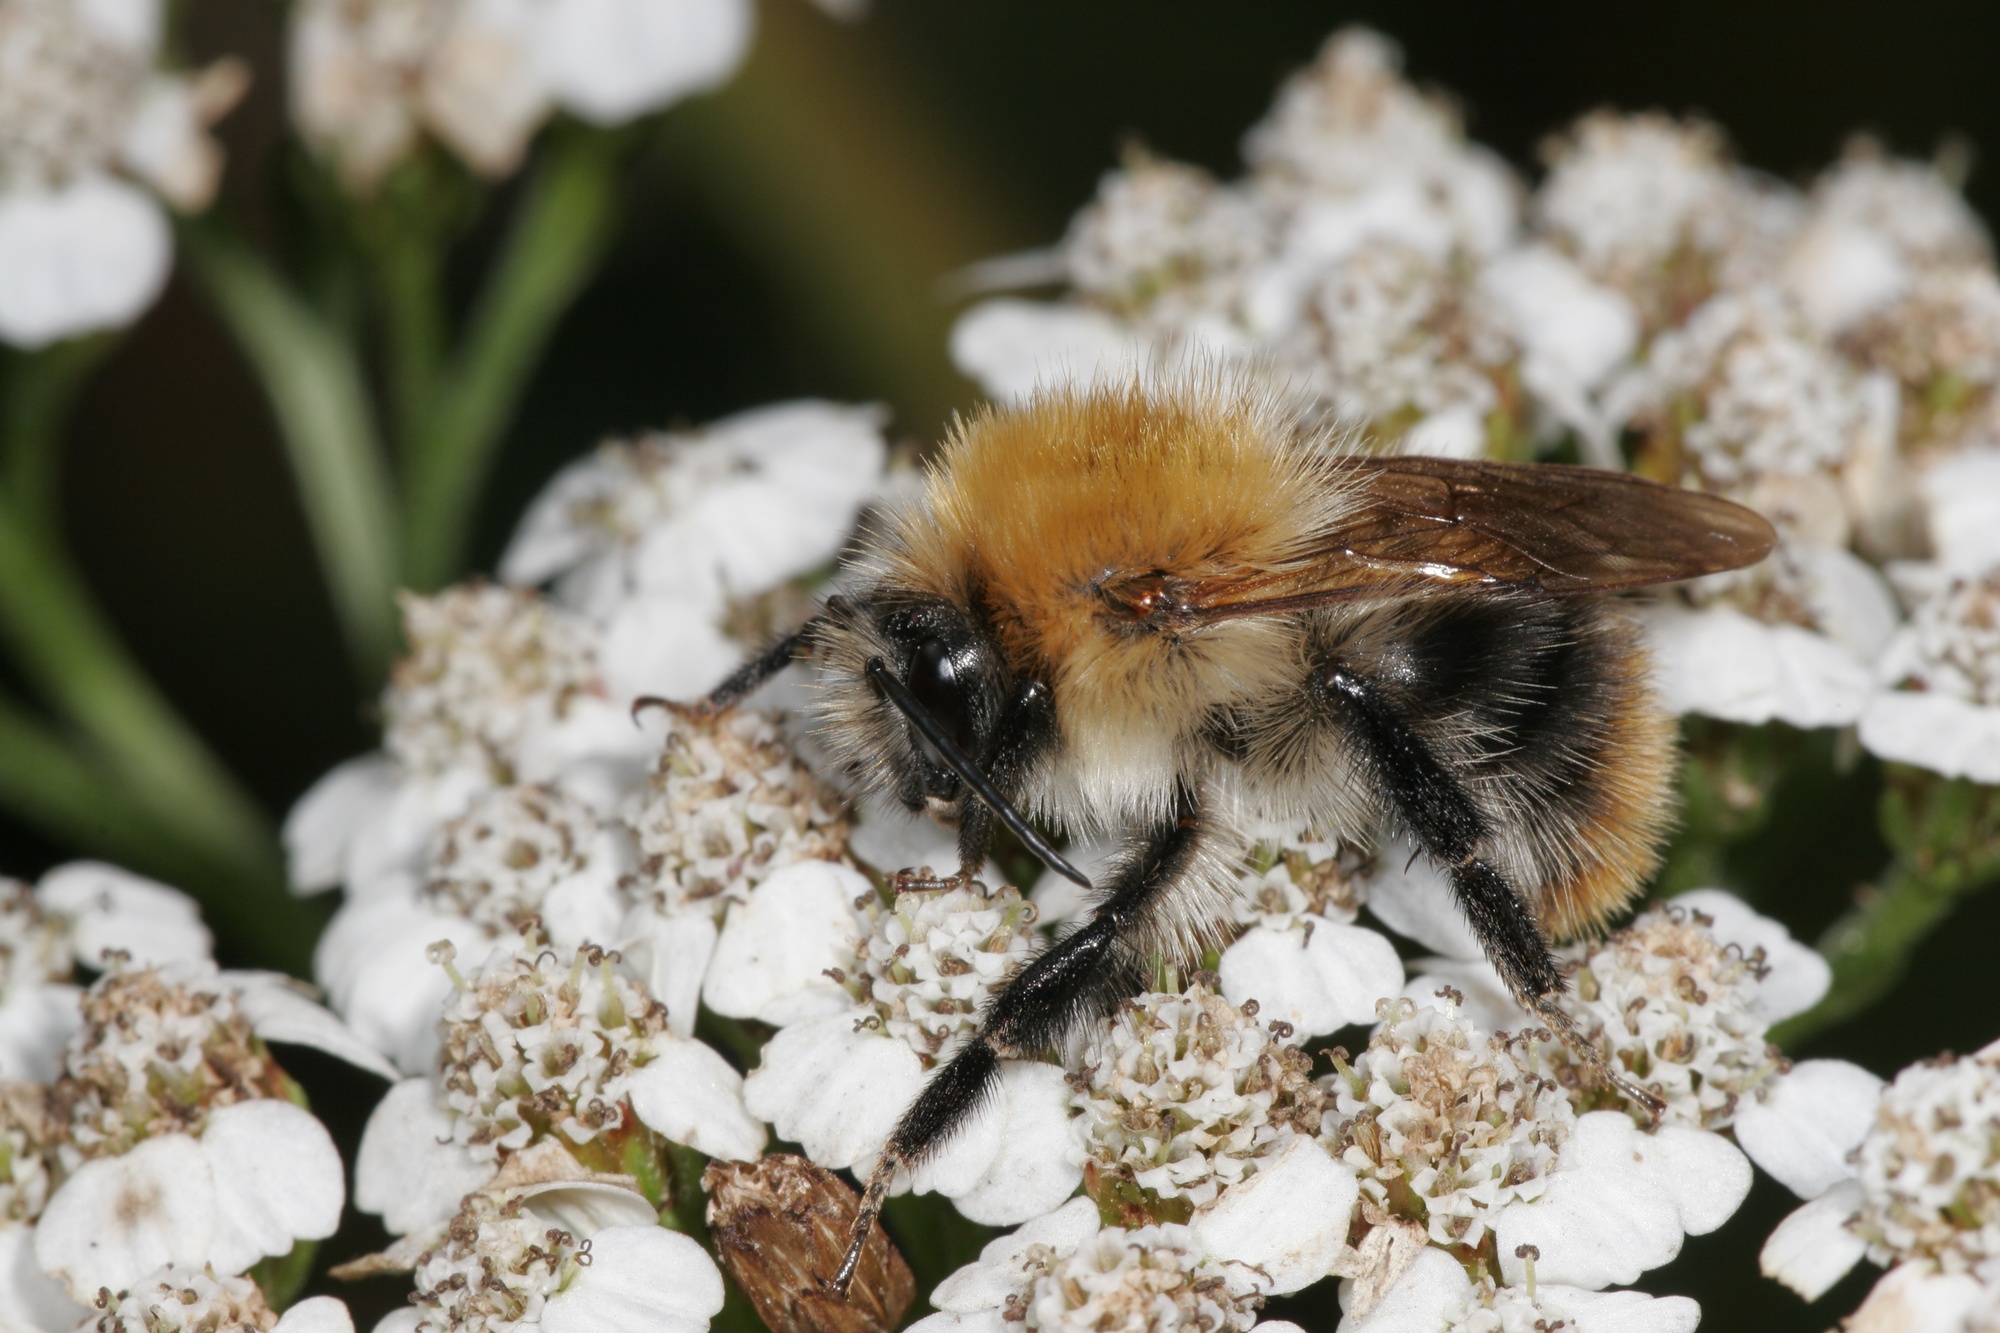 Image of the common carder bee. © Mike Dodd